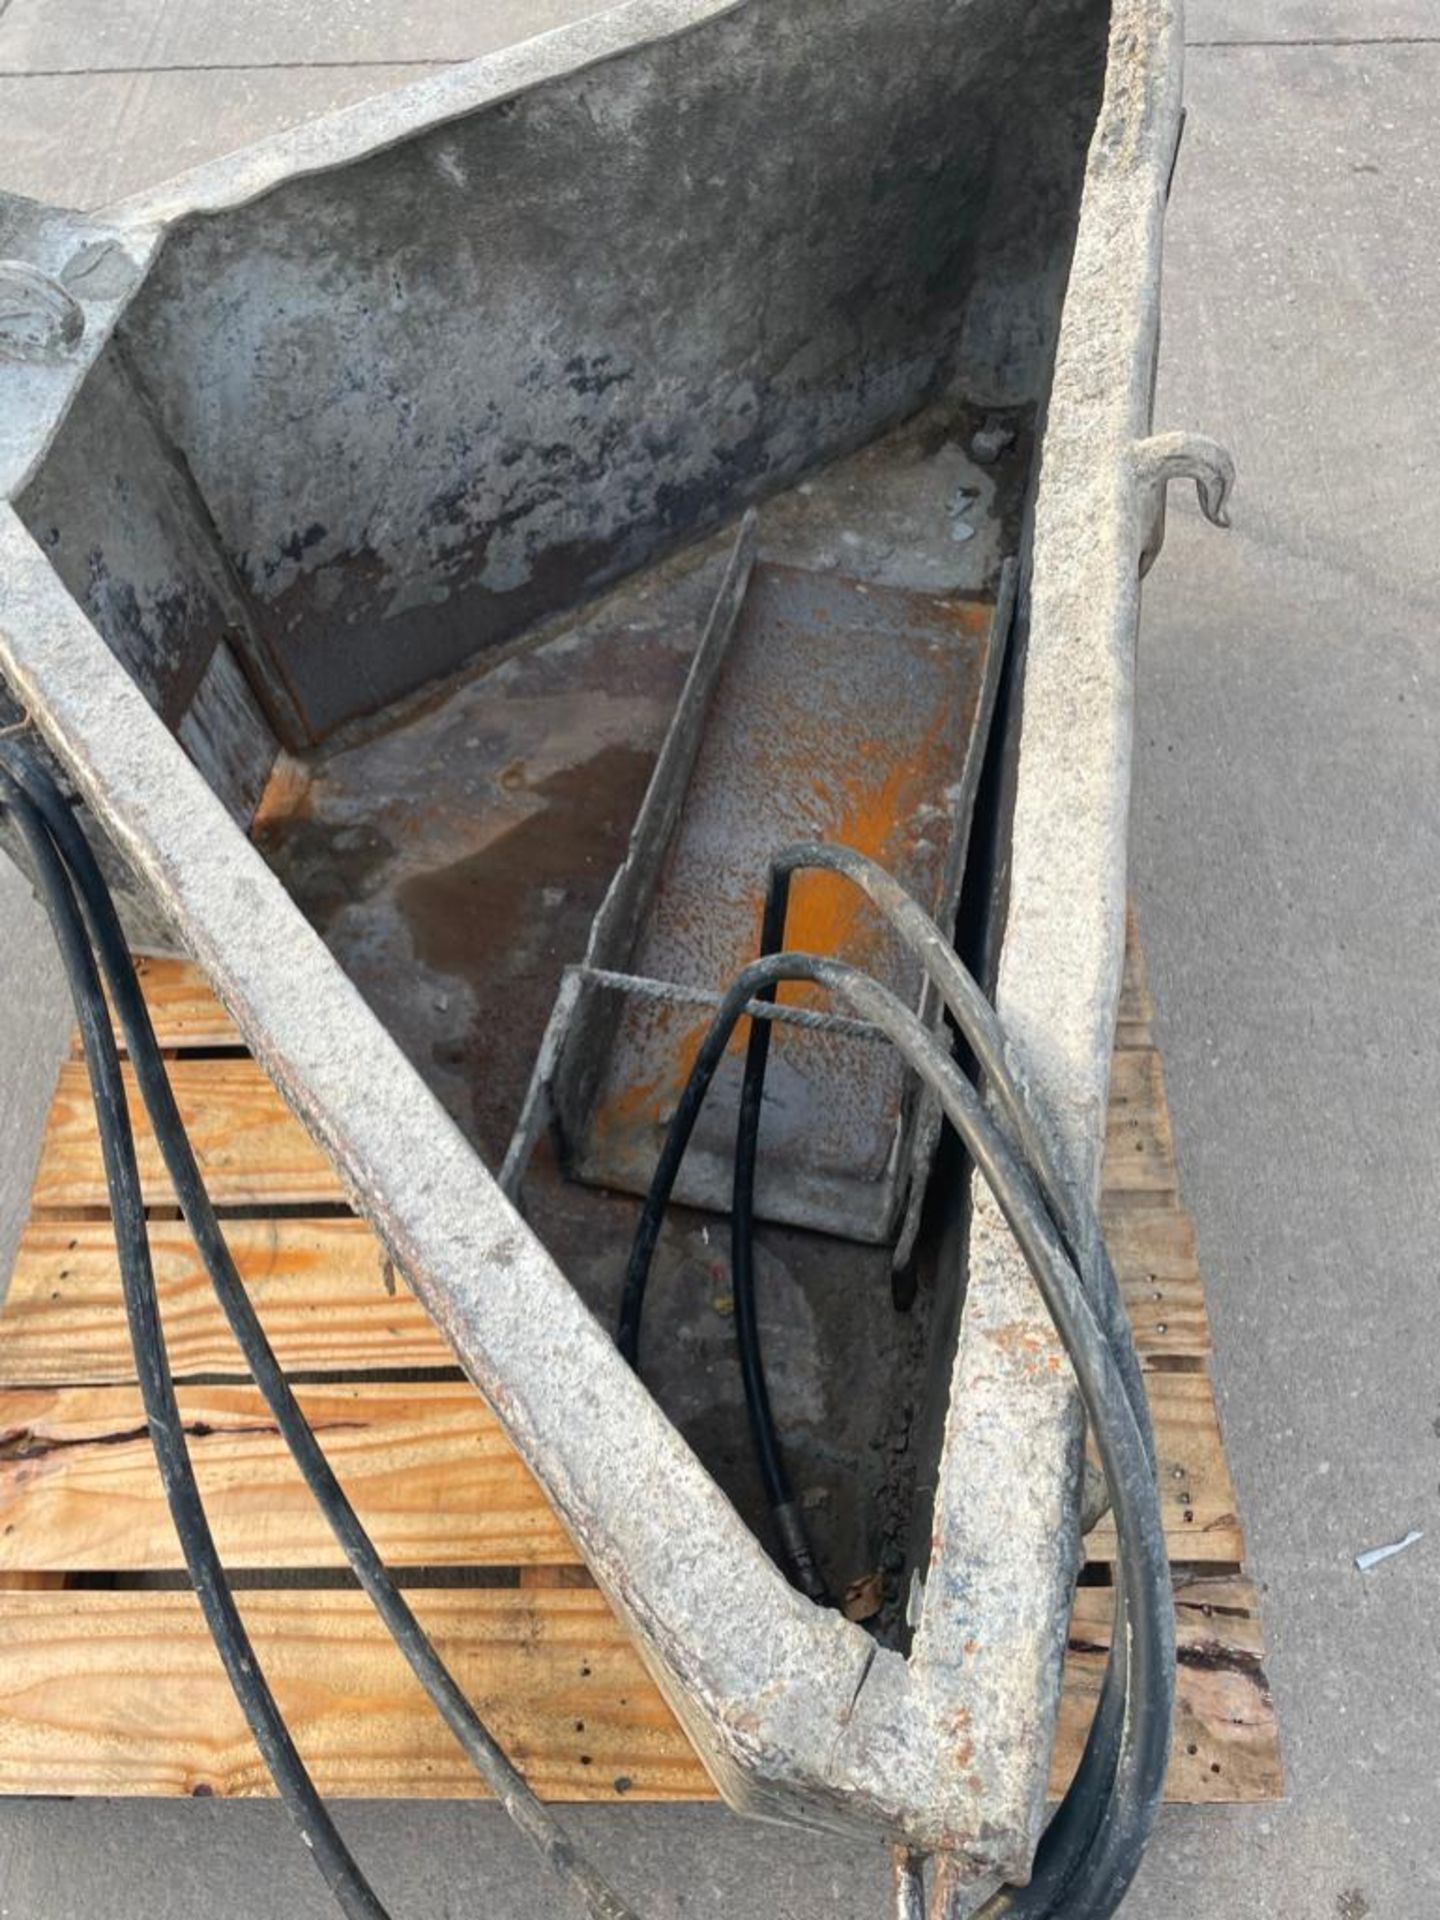 Skid Steer Concrete Chute. Located in Hazelwood, MO - Image 4 of 4